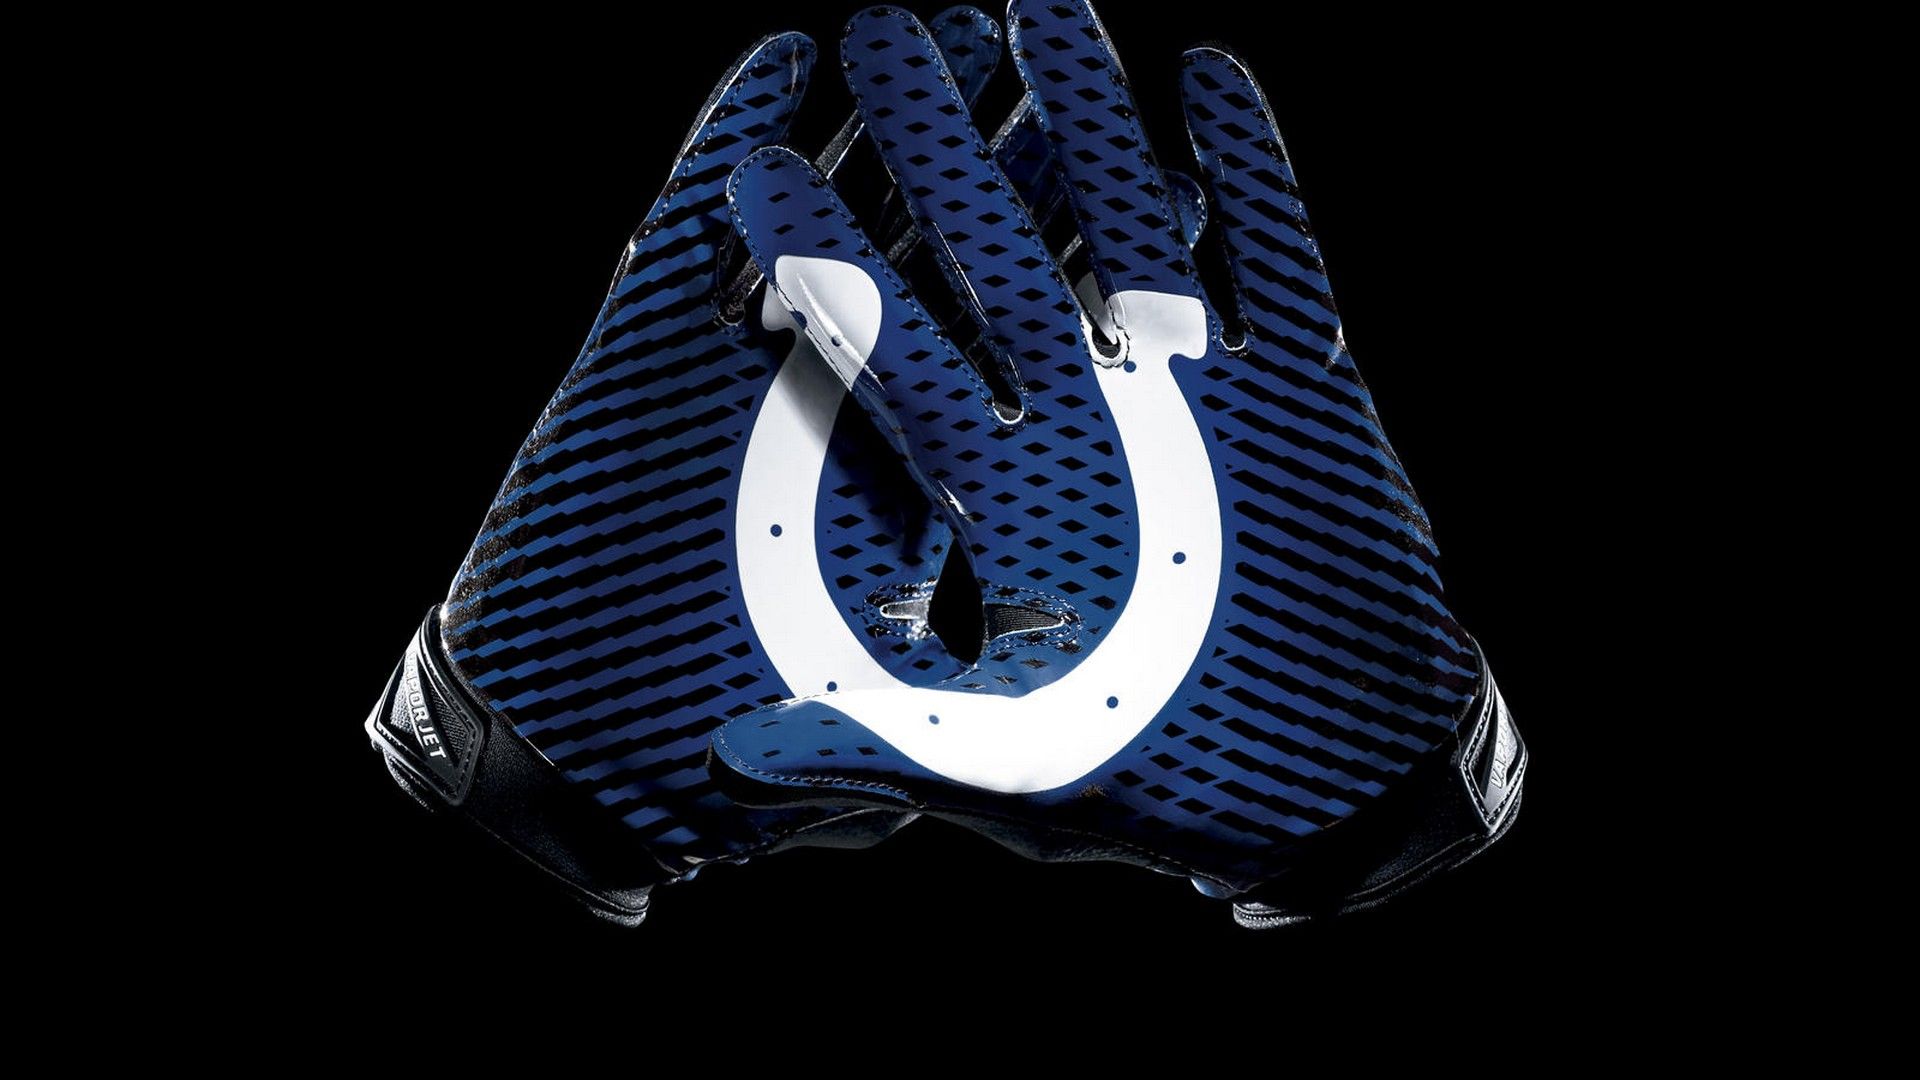 Indianapolis Colts NFL For PC Wallpaper NFL Football Wallpaper